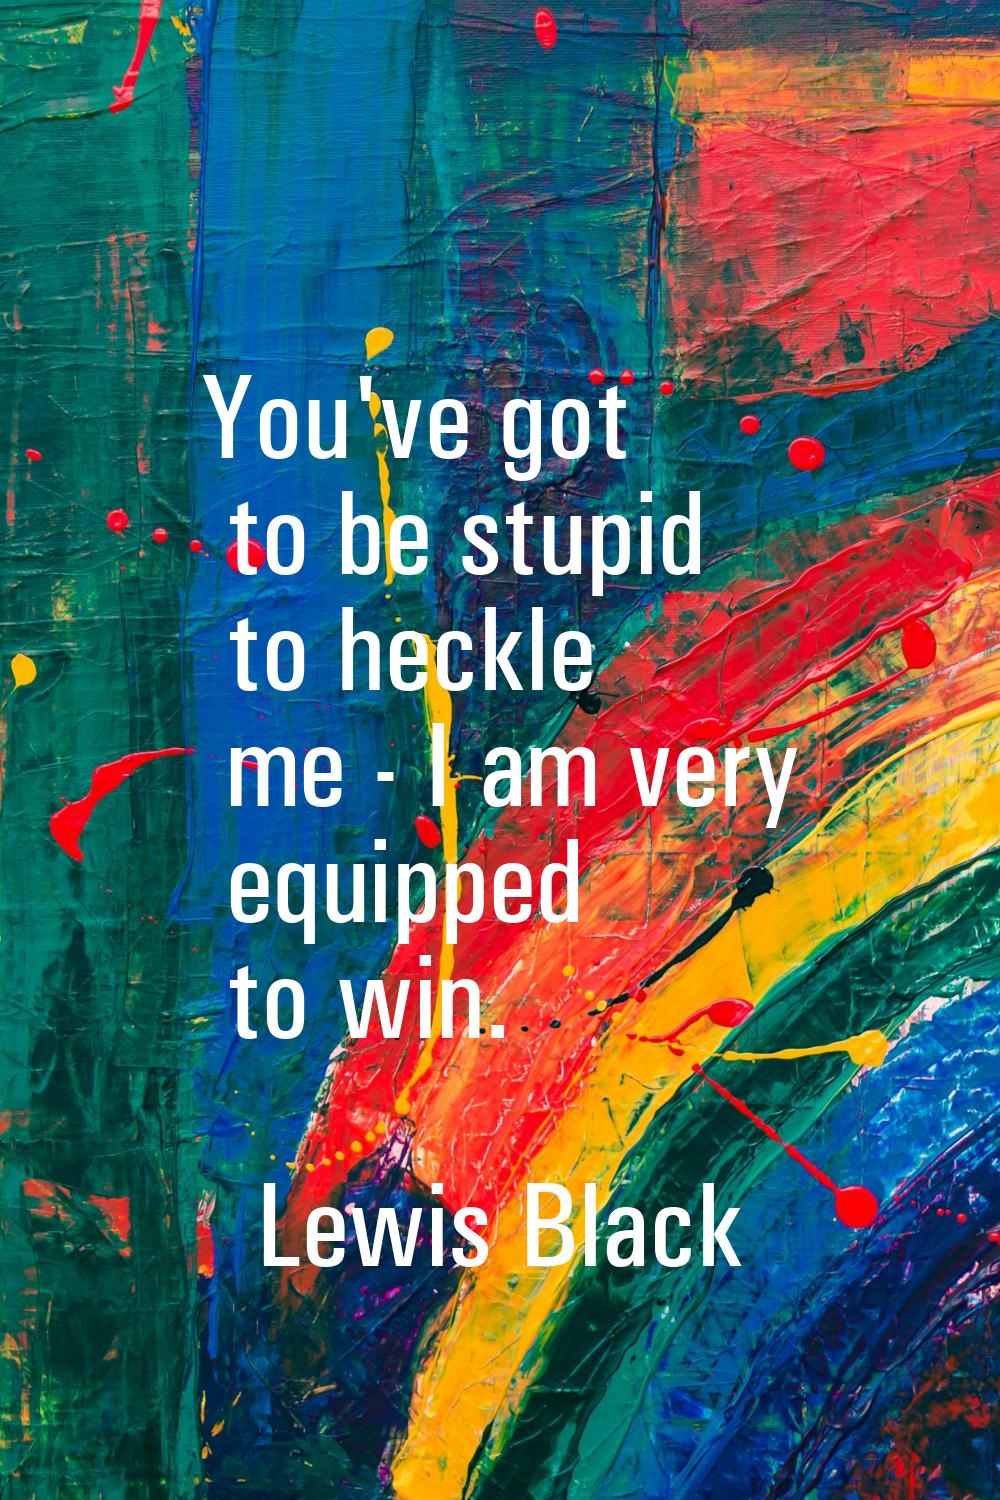 You've got to be stupid to heckle me - I am very equipped to win.